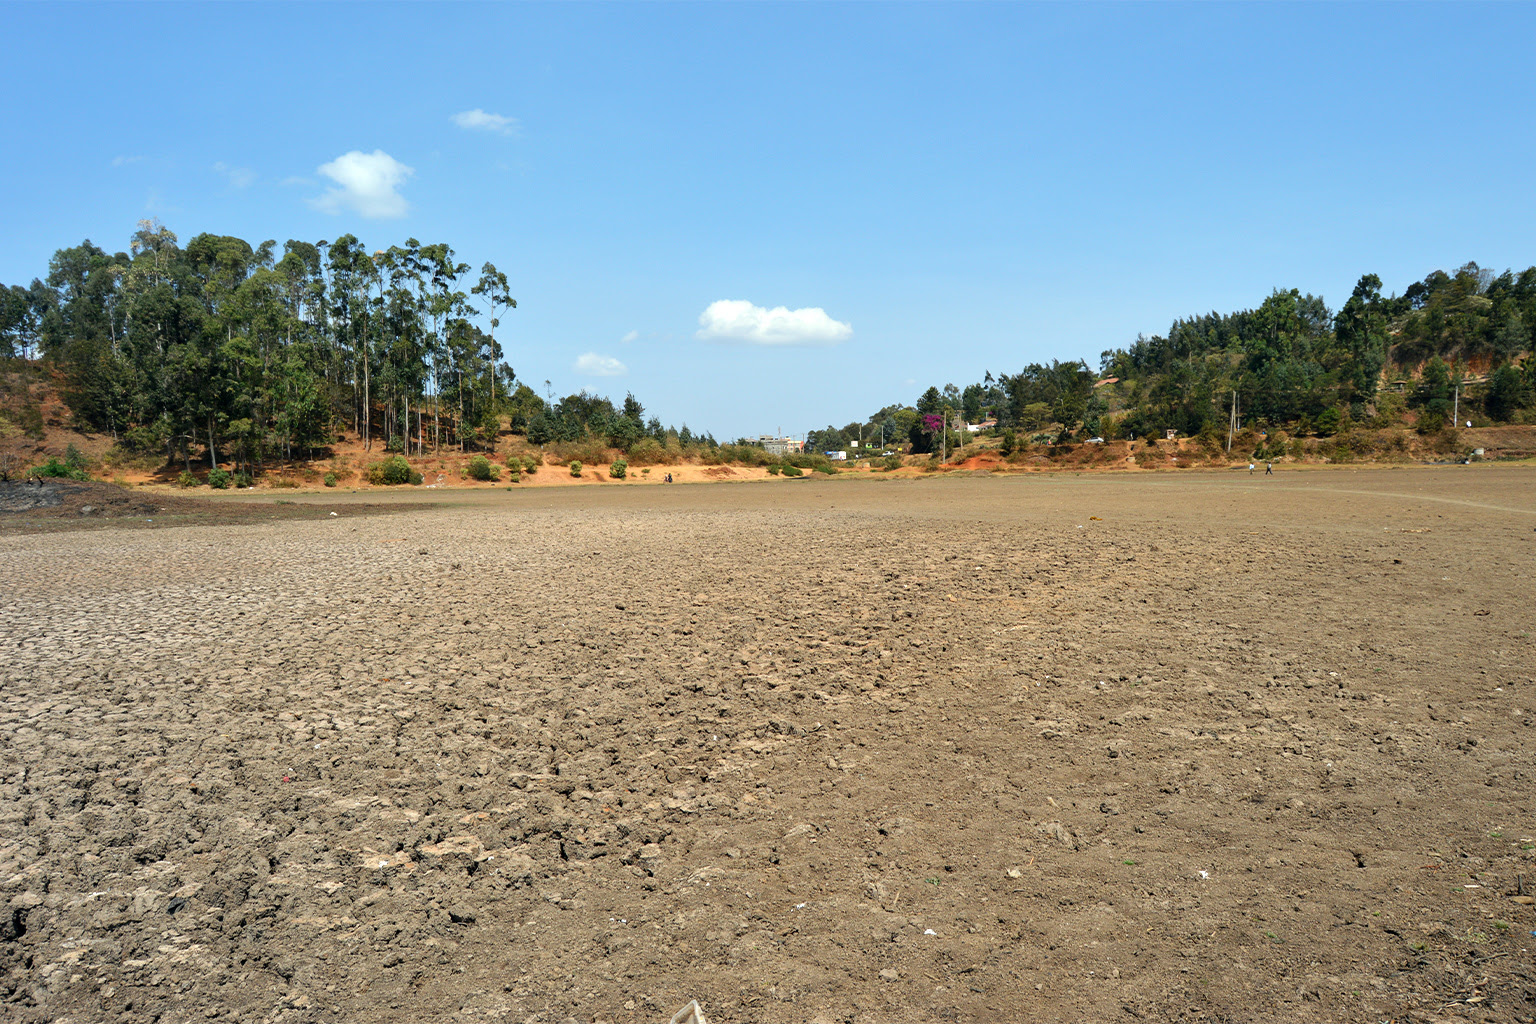 The Manguo swamp now is a desert-like depression, with only countable patches of green grass remaining.